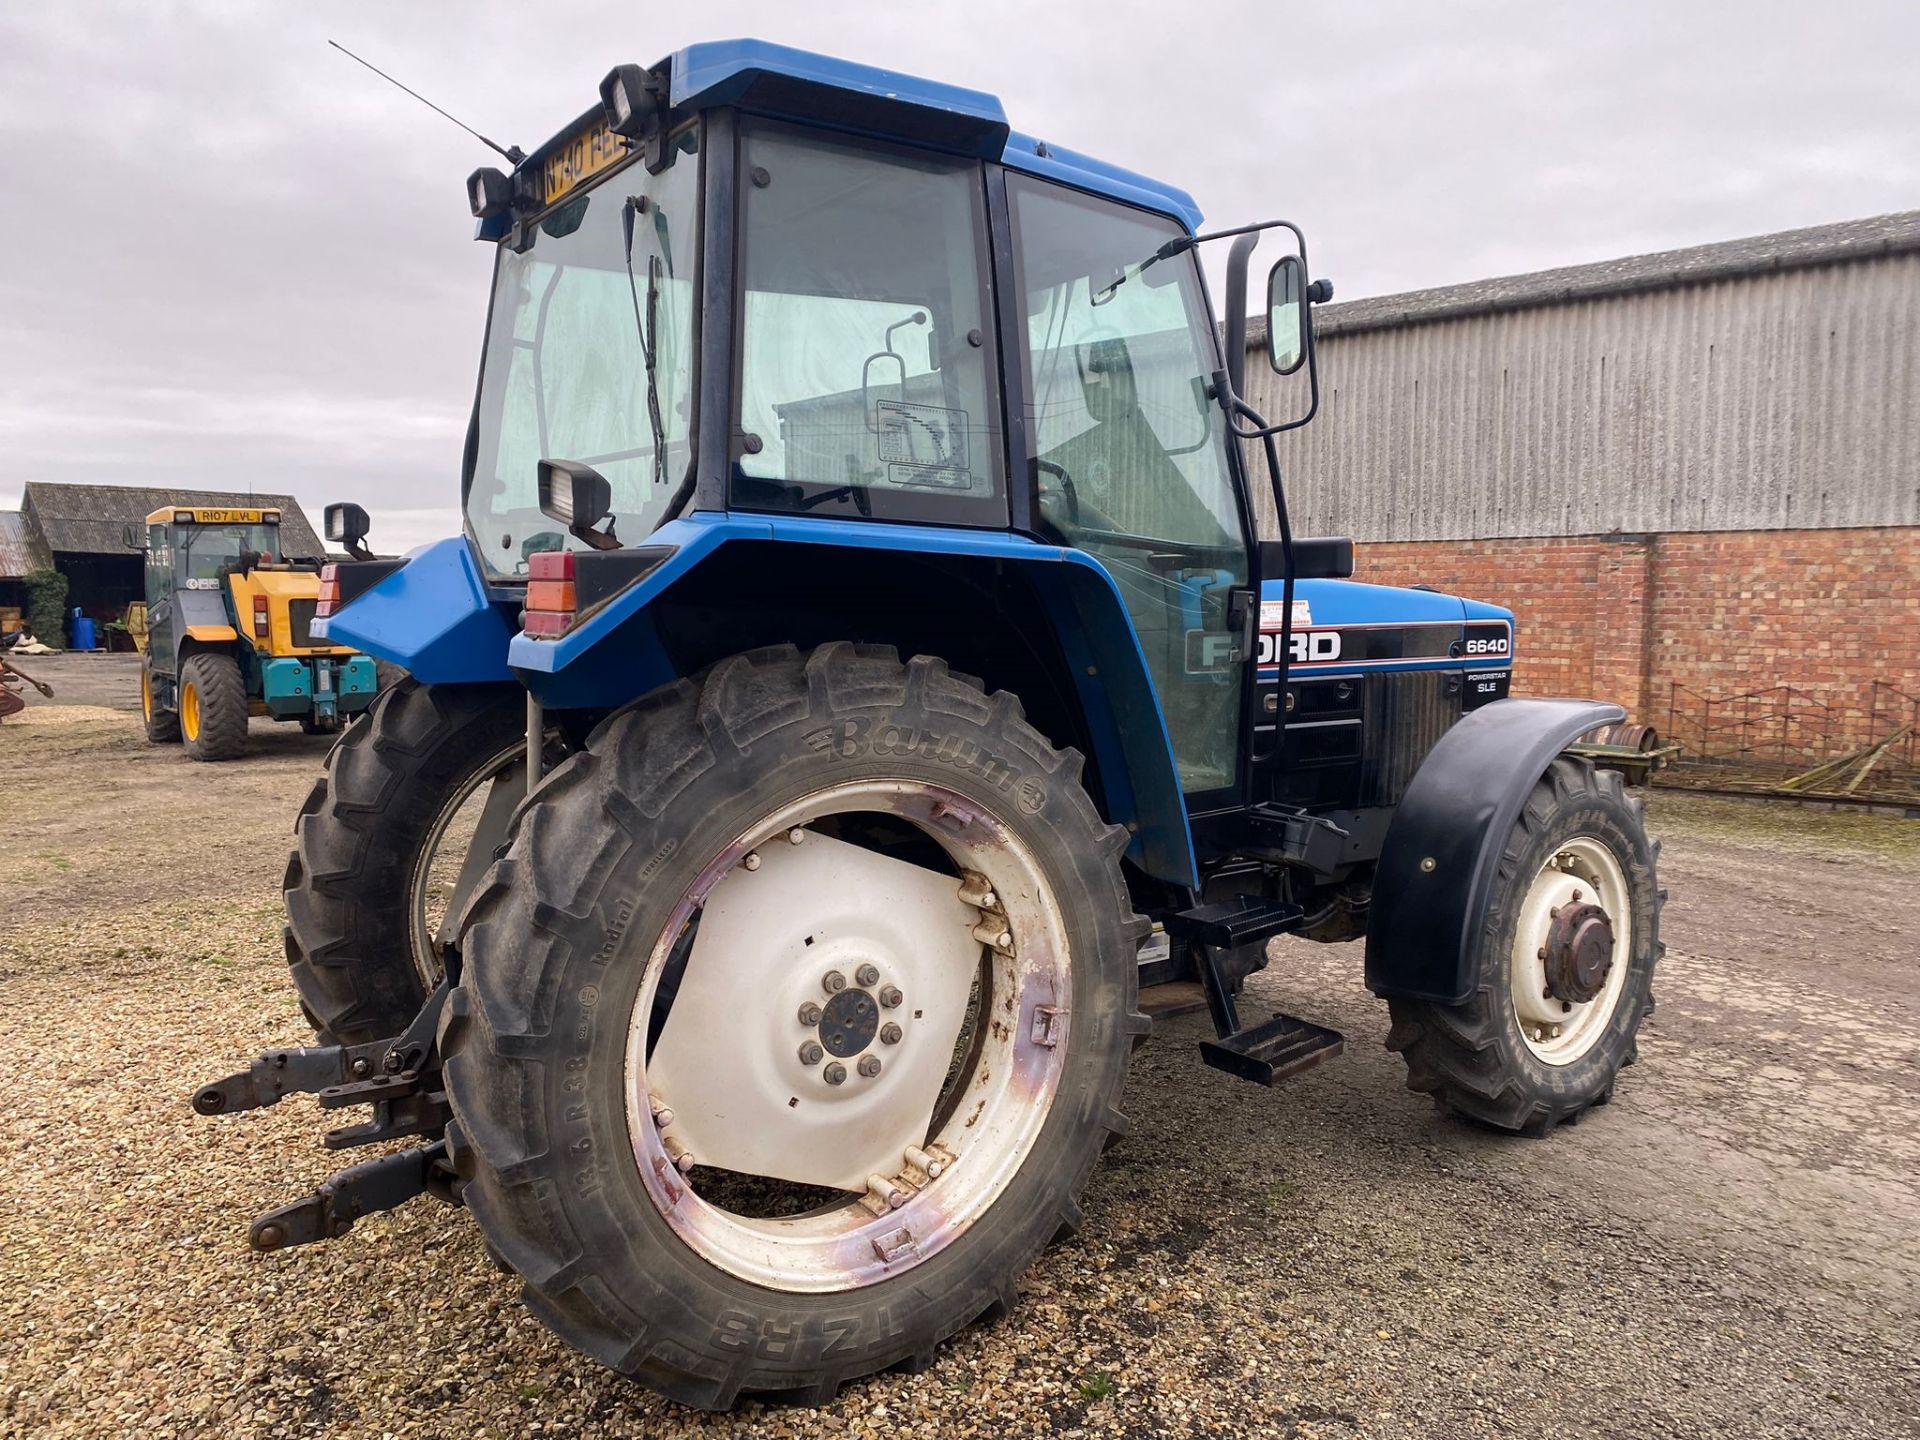 (96) Ford 6640 SLE (Powerstar), 4wd Tractor, Air Con with 6,500 hrs Reg N740 PEE, Rear tyres 13.6 - Image 4 of 6